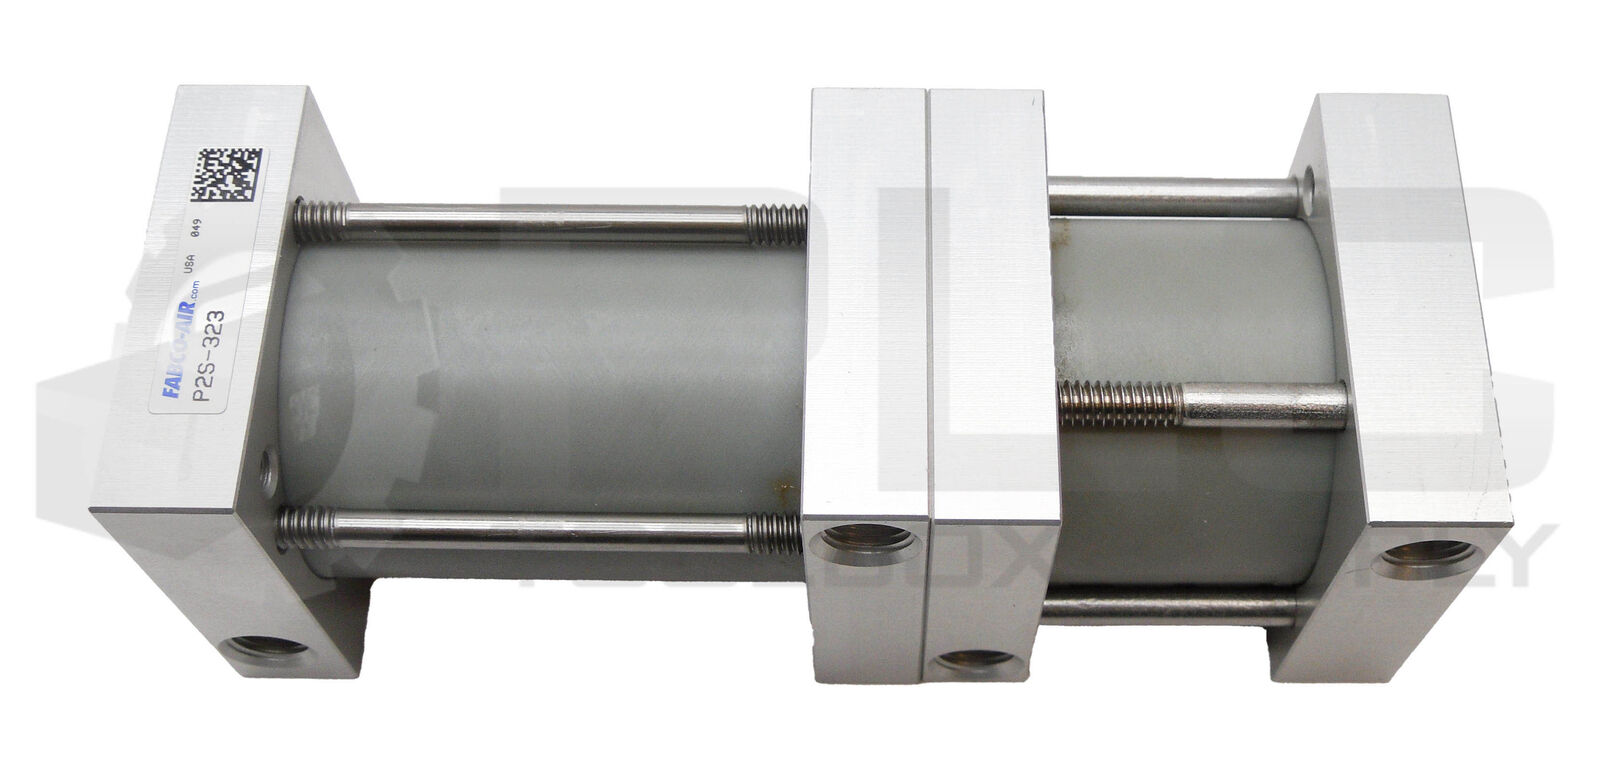 NEW FABCO-AIR P2S-323 PNEUMATIC CYLINDER